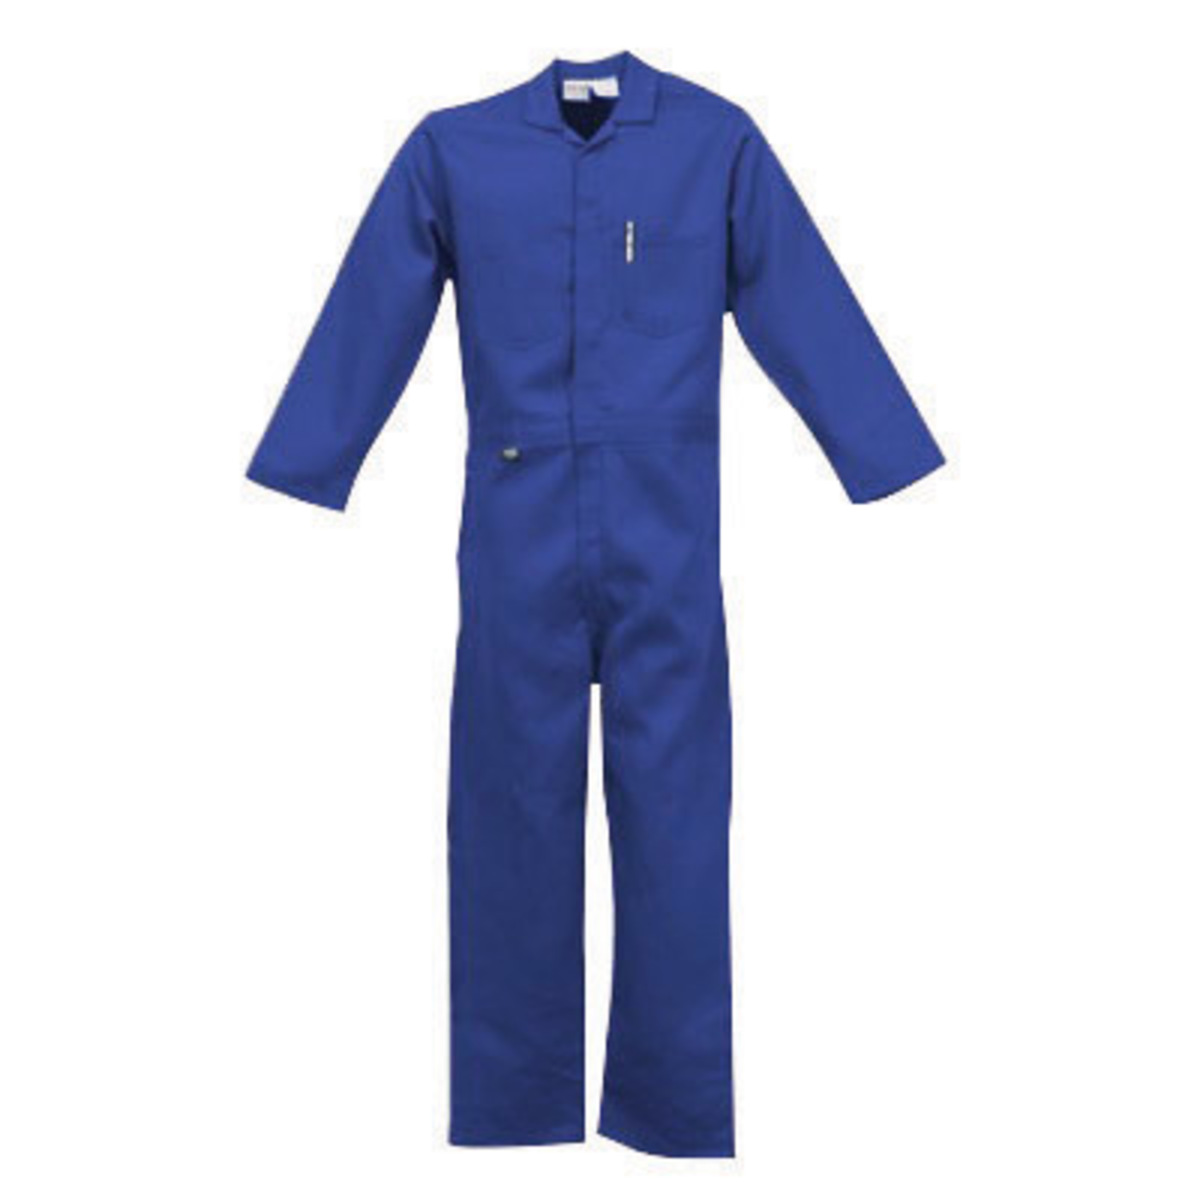 Stanco Safety Products™ Medium Royal Blue Nomex® IIIA Arc Rated Flame Resistant Coveralls With Front Zipper Closure And 1 (4.8 c